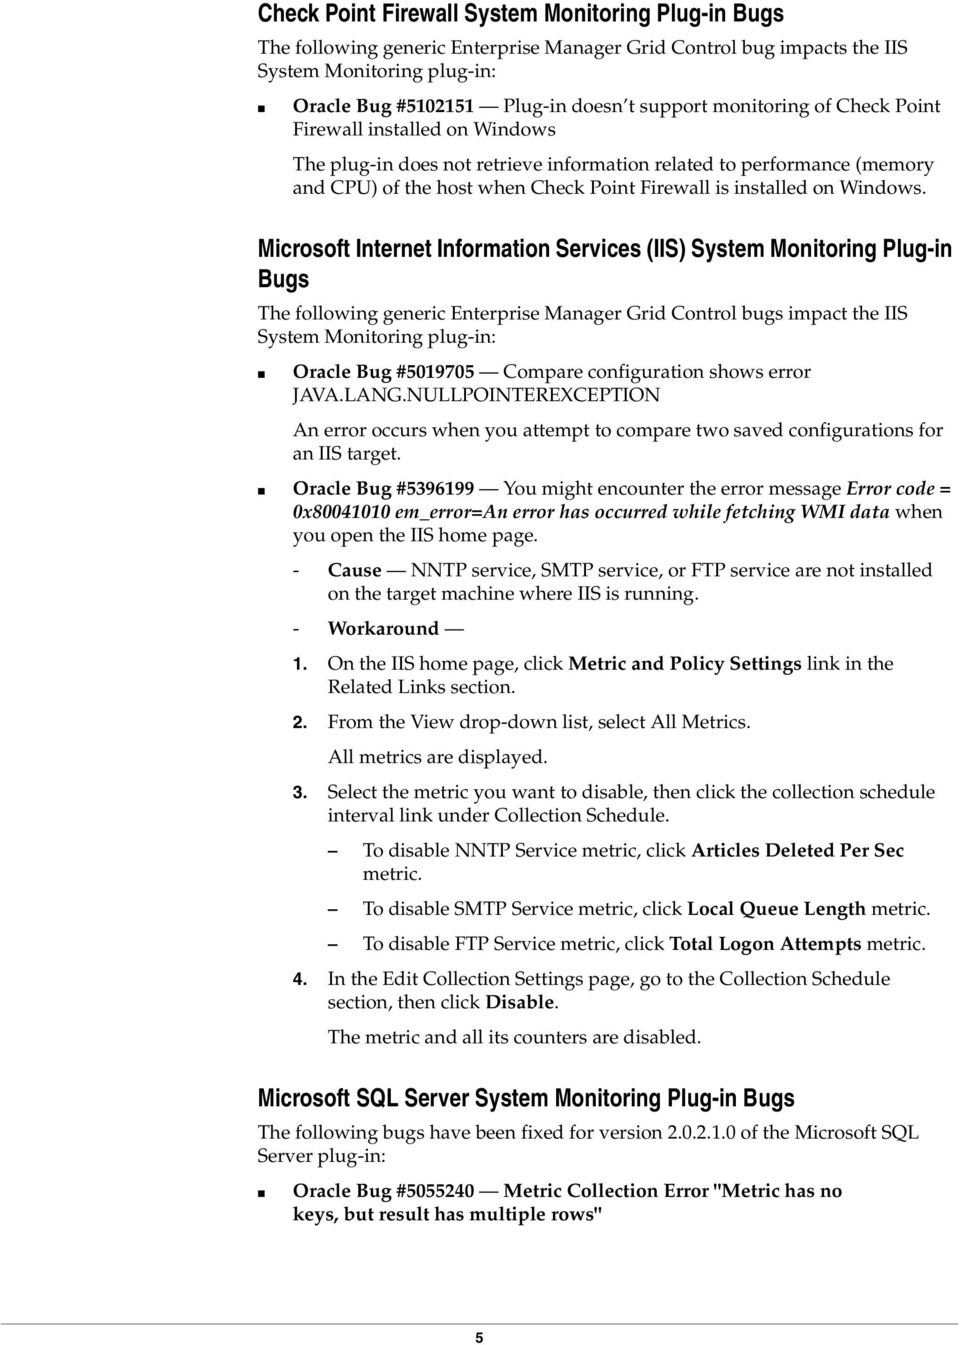 Microsoft Internet Information Services (IIS) System Monitoring Plug-in Bugs The following generic Enterprise Manager Grid Control bugs impact the IIS System Monitoring plug-in: Oracle Bug #5019705